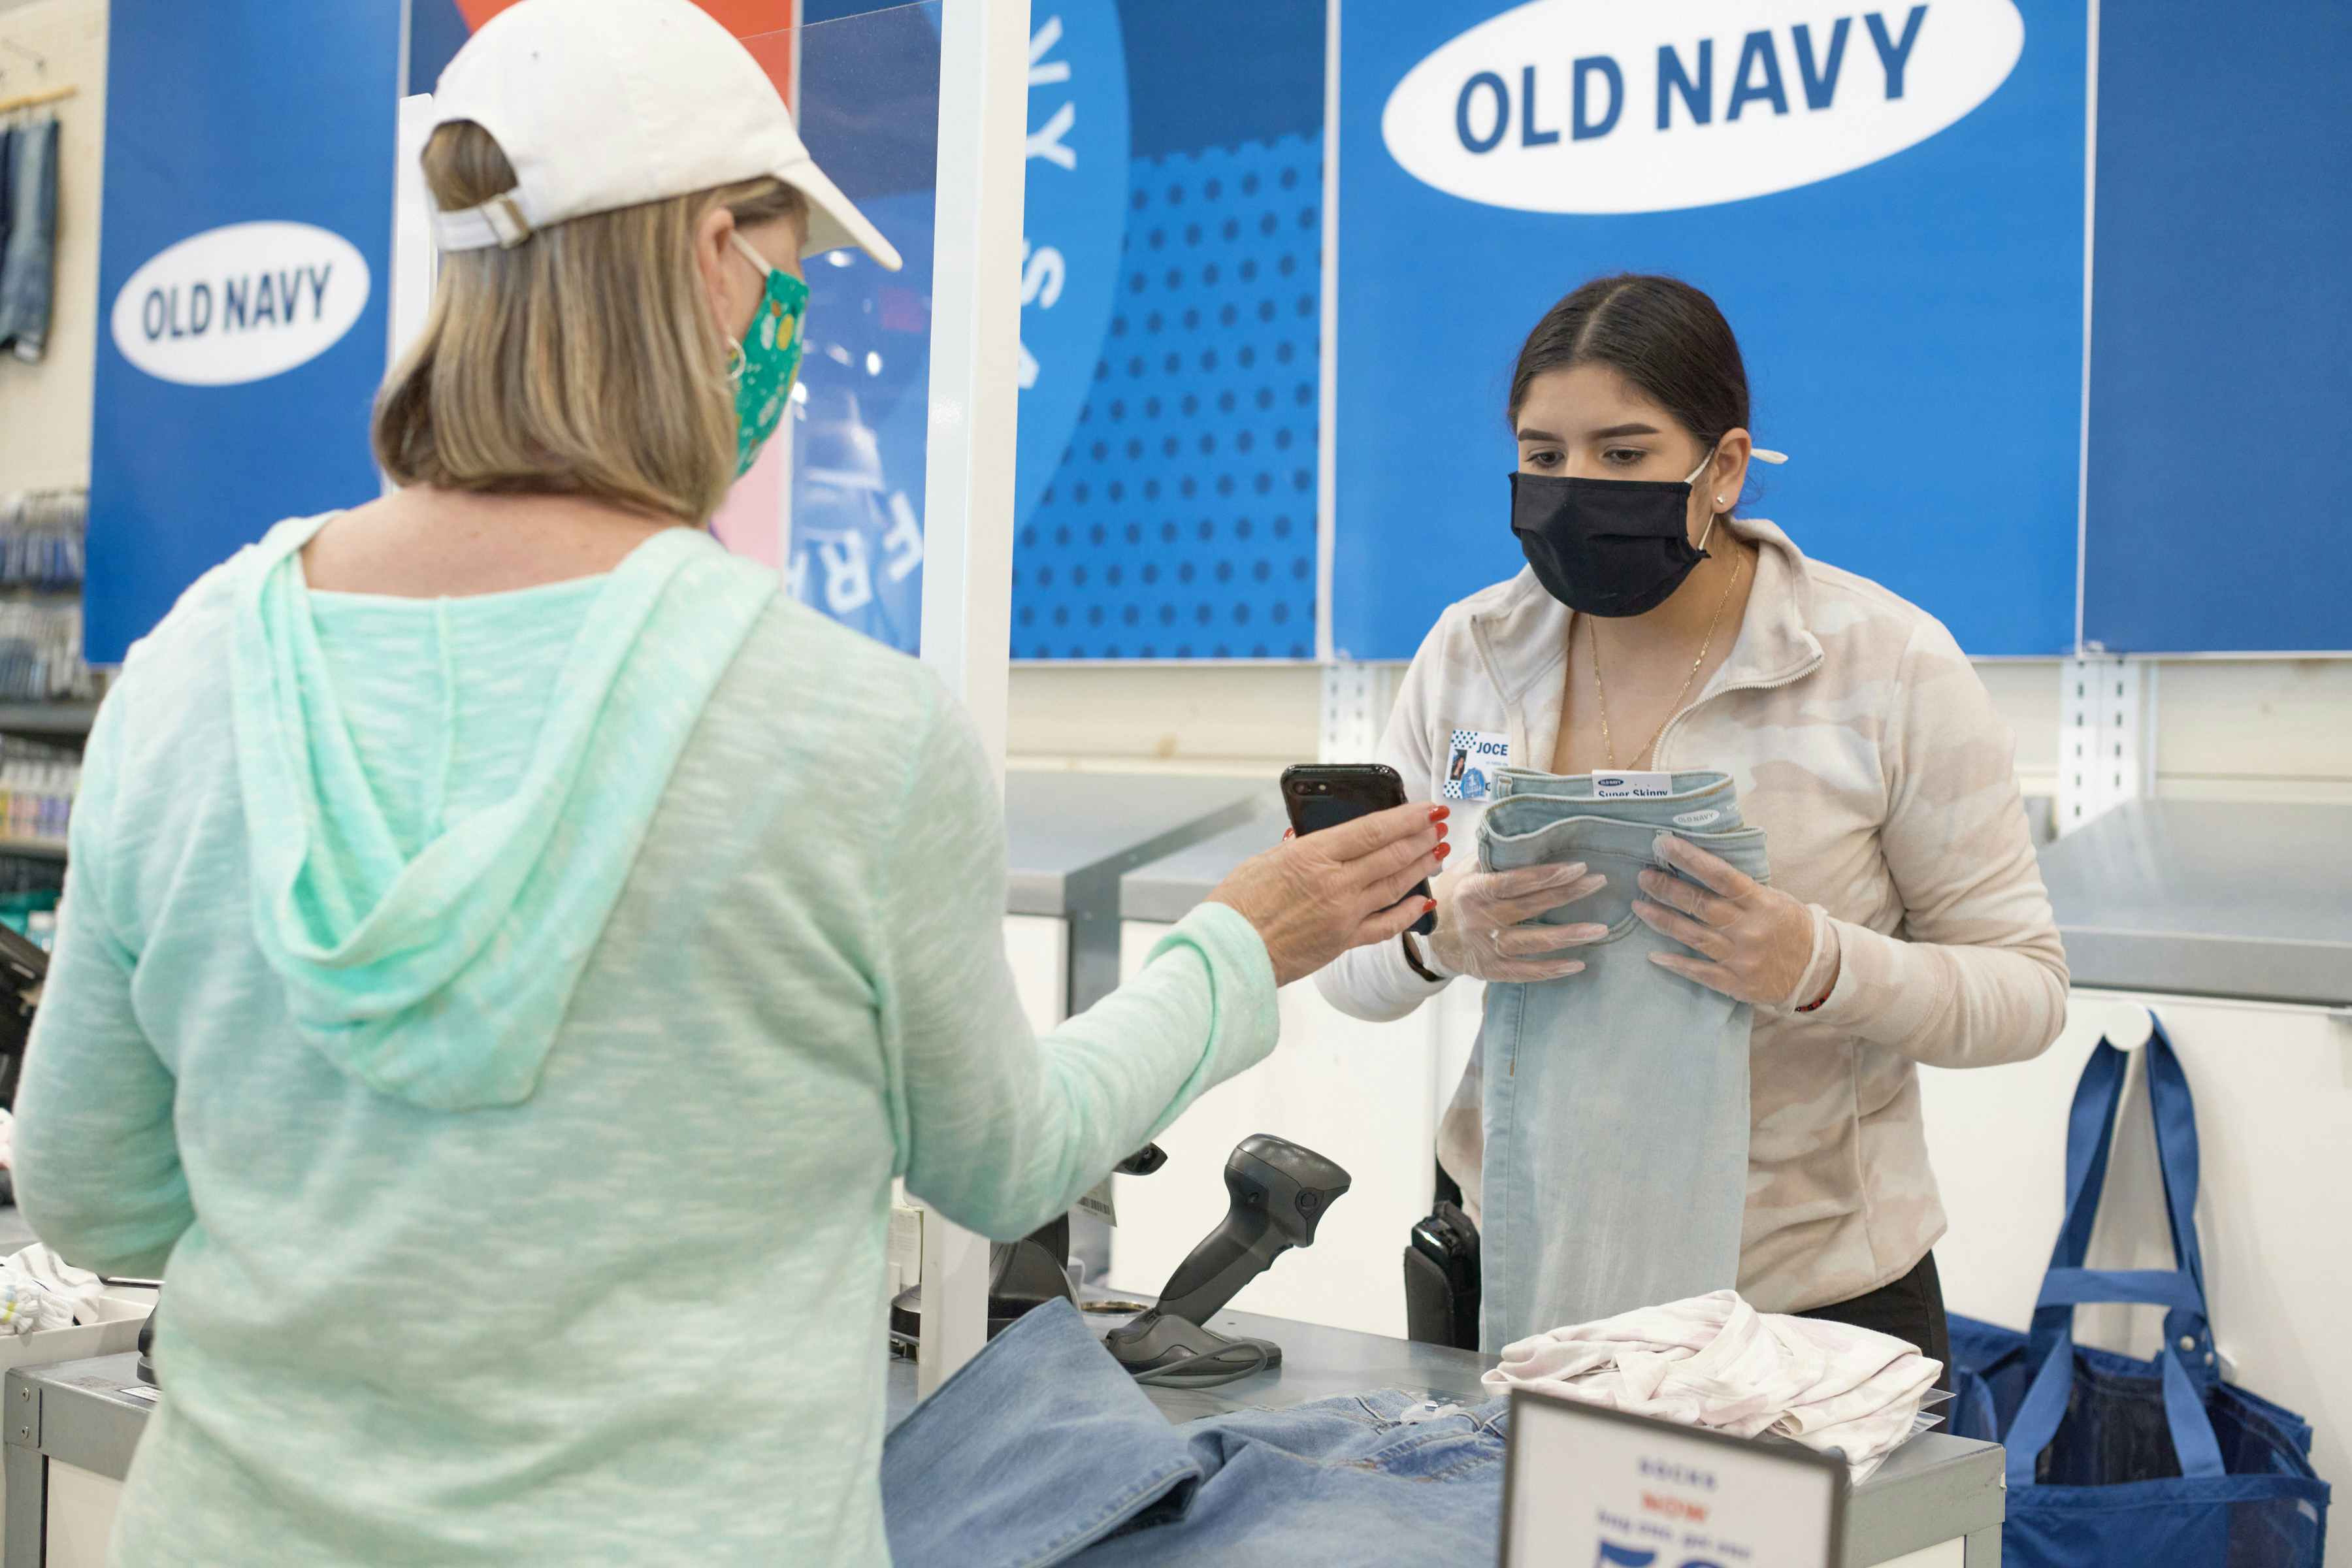 A customer showing an Old Navy employee their cell phone.